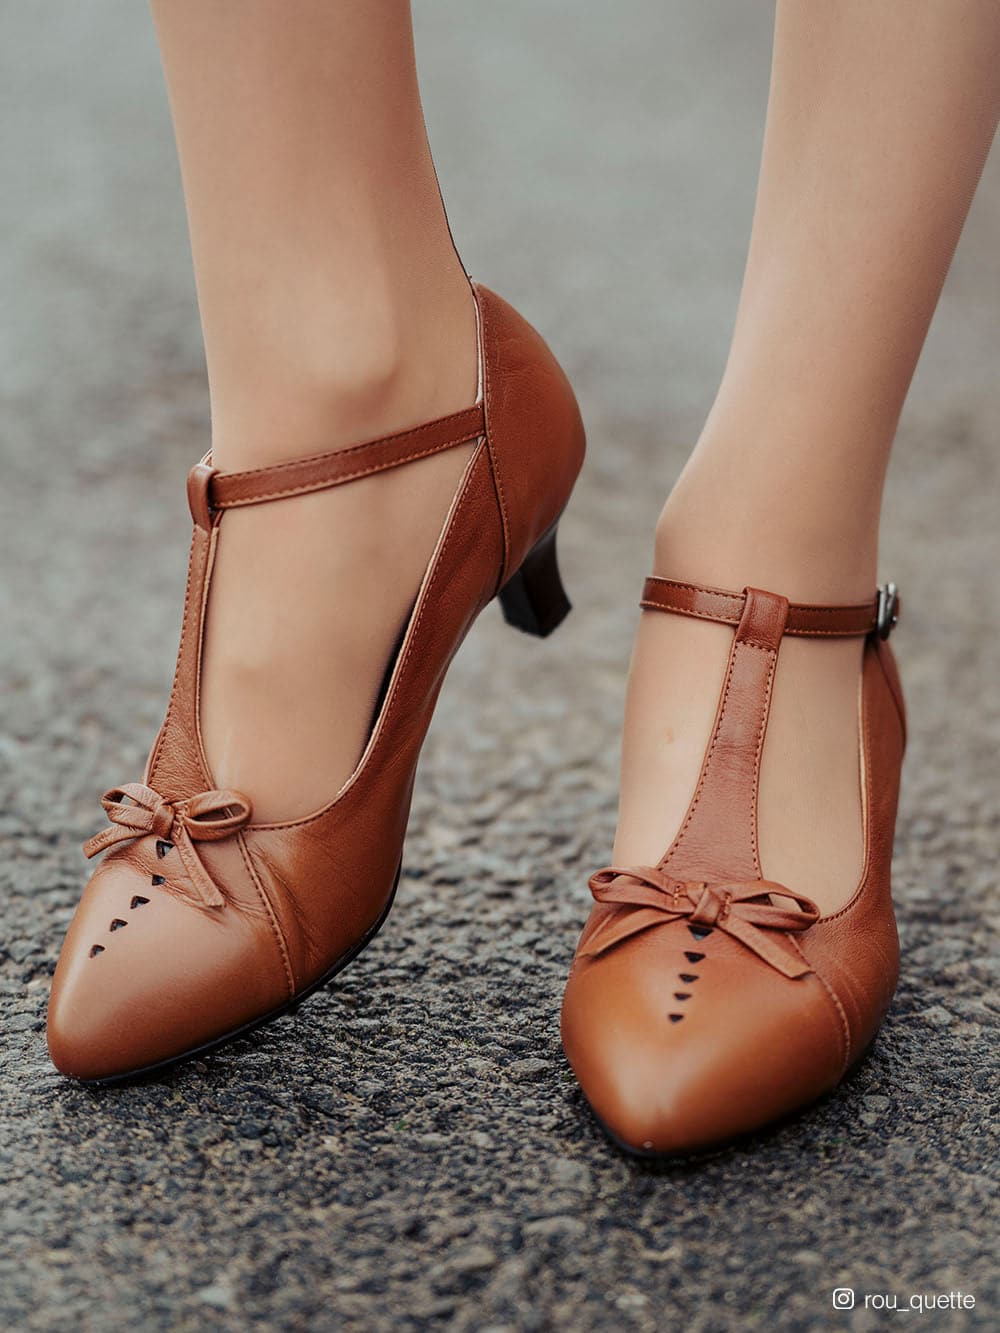 Women‘s Pointed-toe Leather Shoes